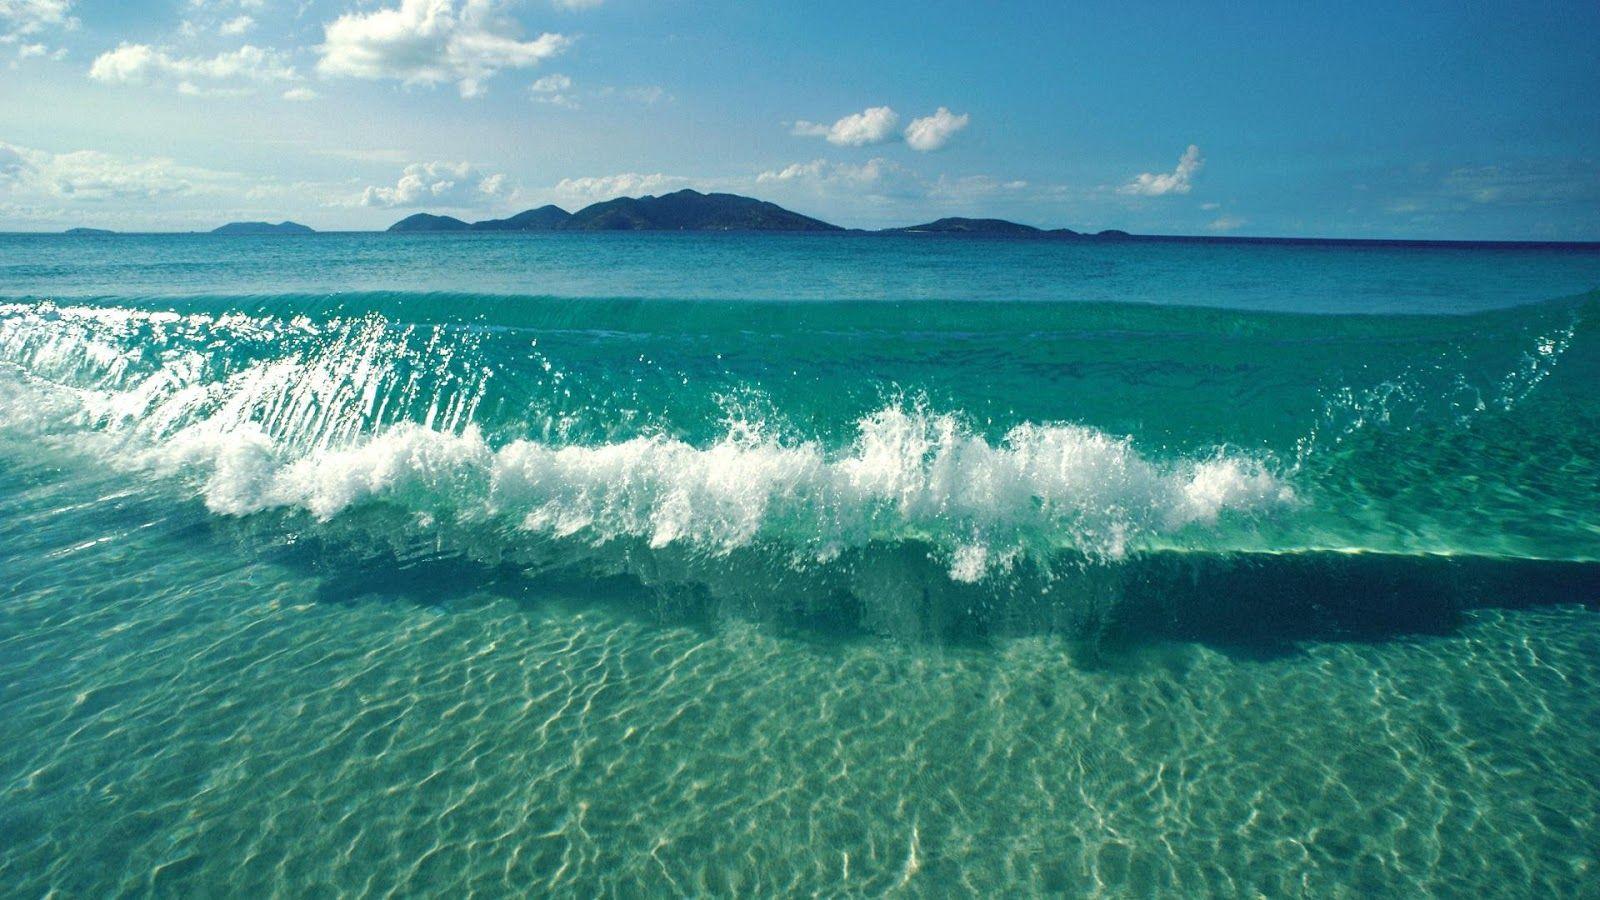 Download Free Ocean Waves Wallpaper. Most beautiful places in